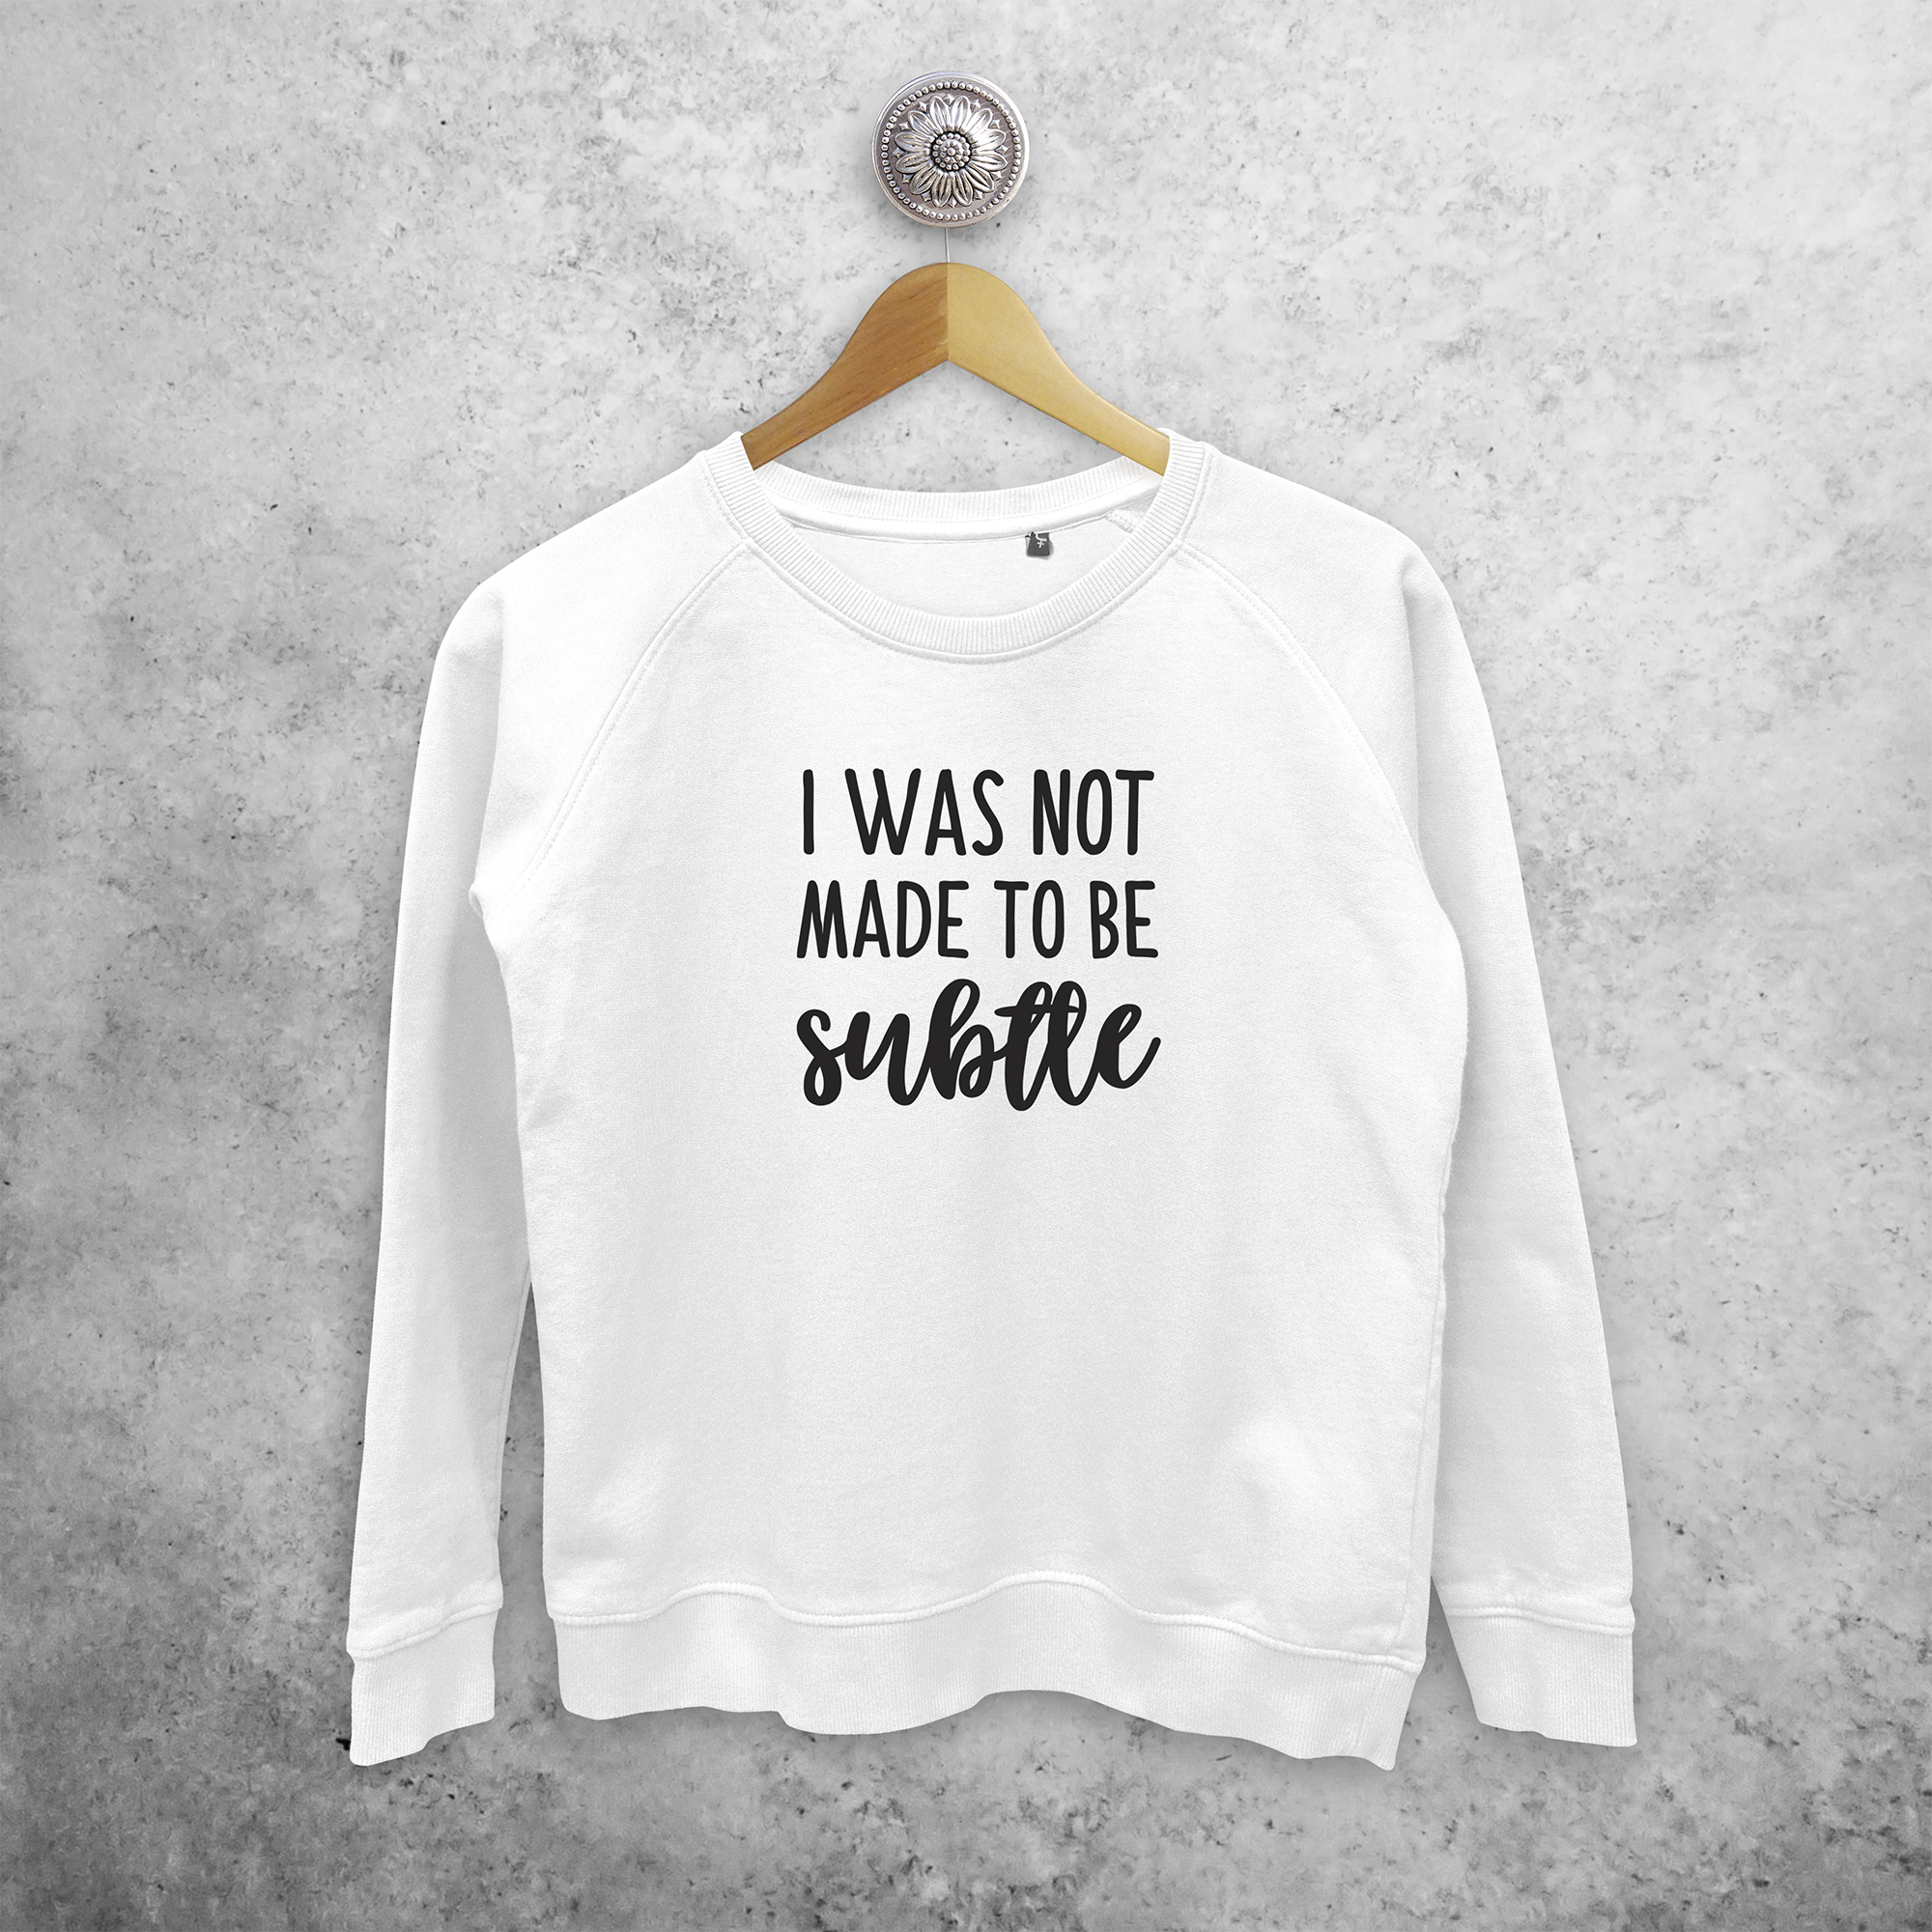 'I was not made to be subtle' sweater